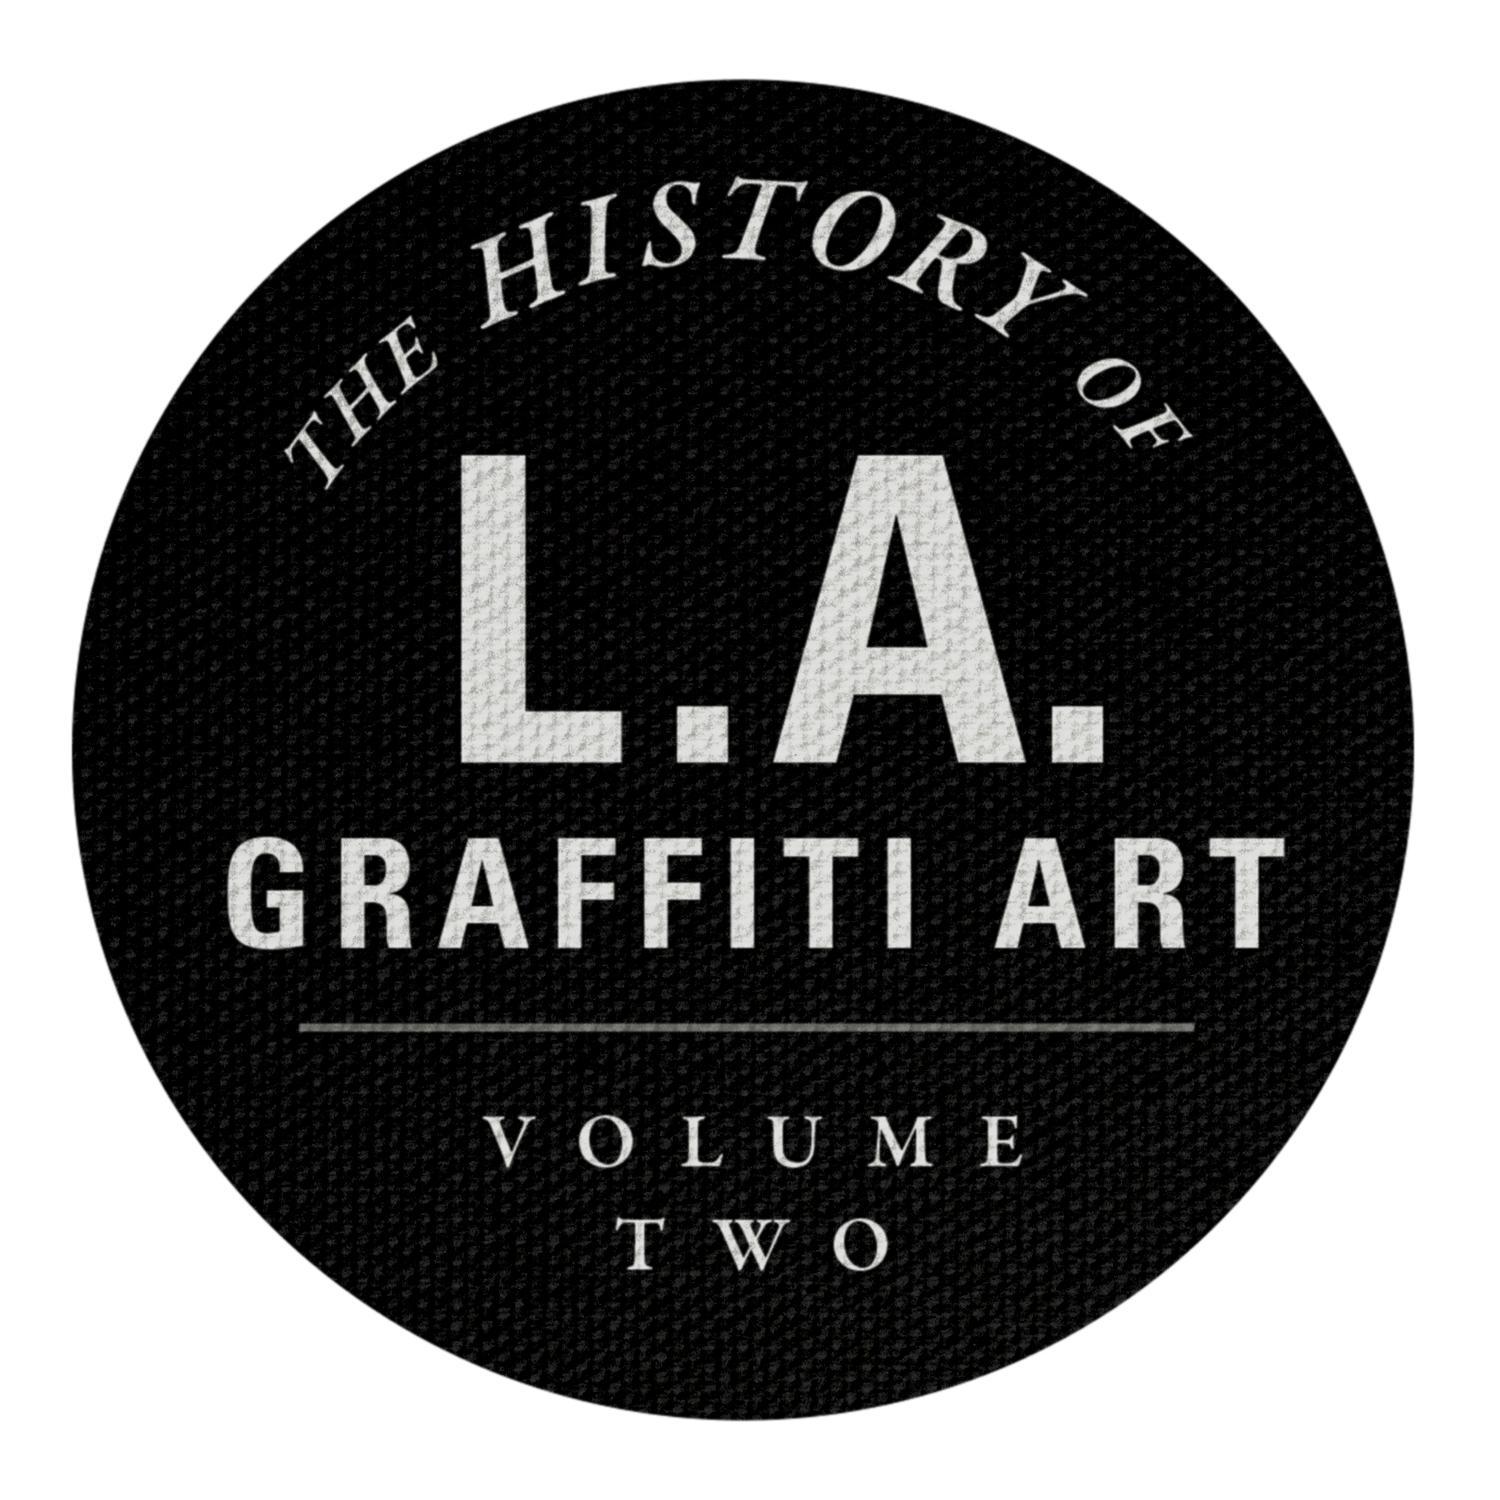 PREORDER!!! At the official site of The History of Los Angeles Graffiti Art Volume Two - 1989 to 1994 Kickstarter fundraising project.